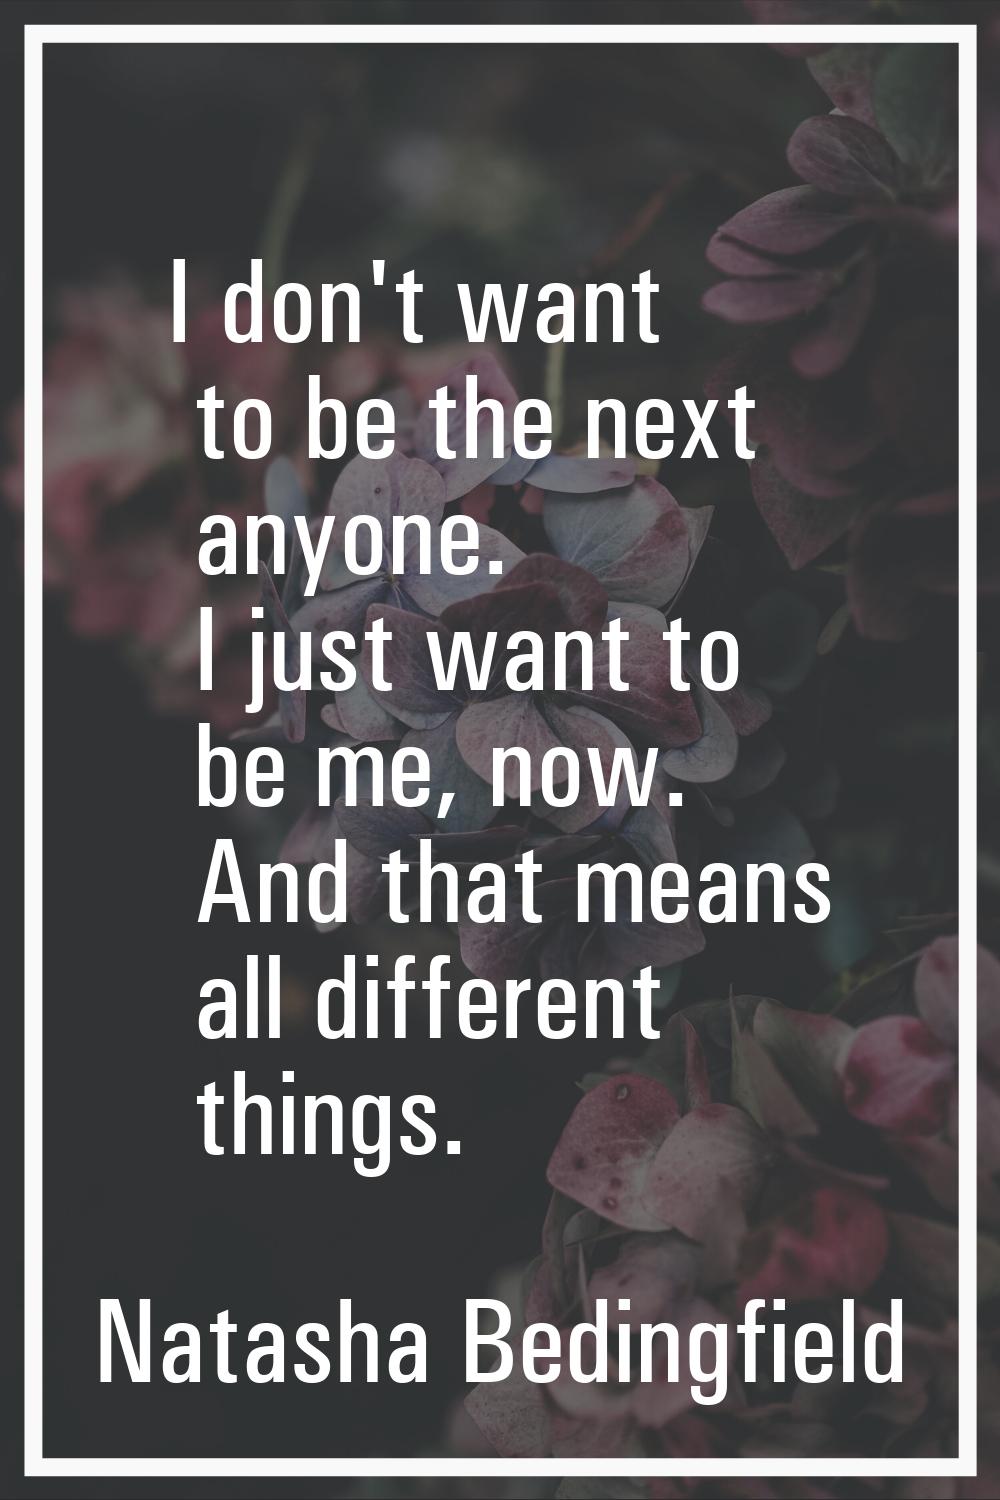 I don't want to be the next anyone. I just want to be me, now. And that means all different things.